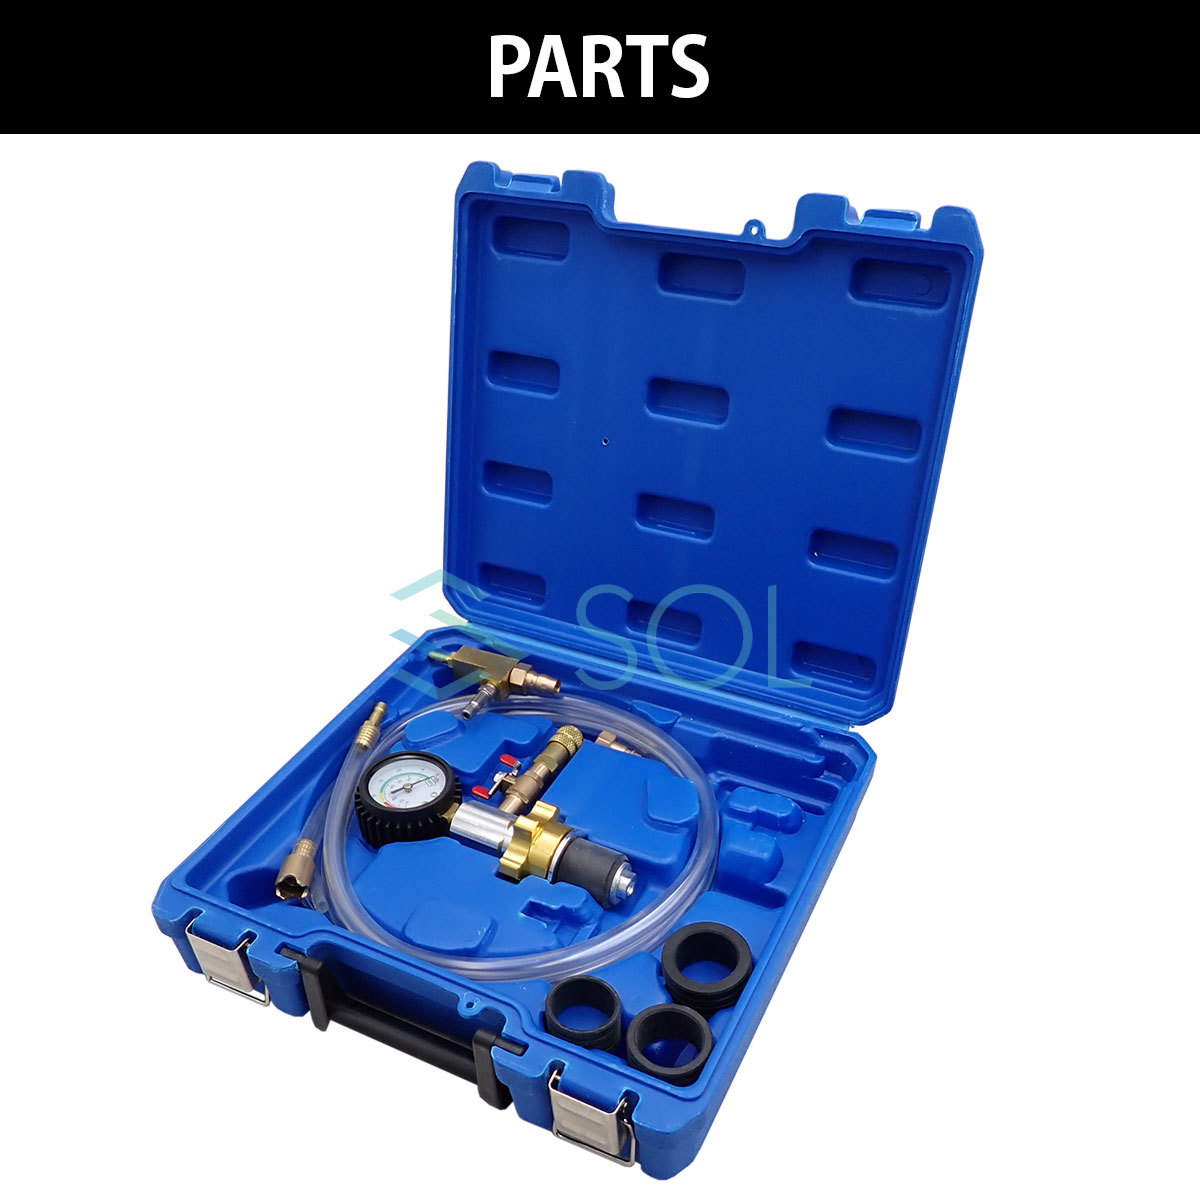  radiator radiator coolant note go in coolant charger vacuum discount air pulling out exchange air tool 6 point set shipping deadline 18 hour 